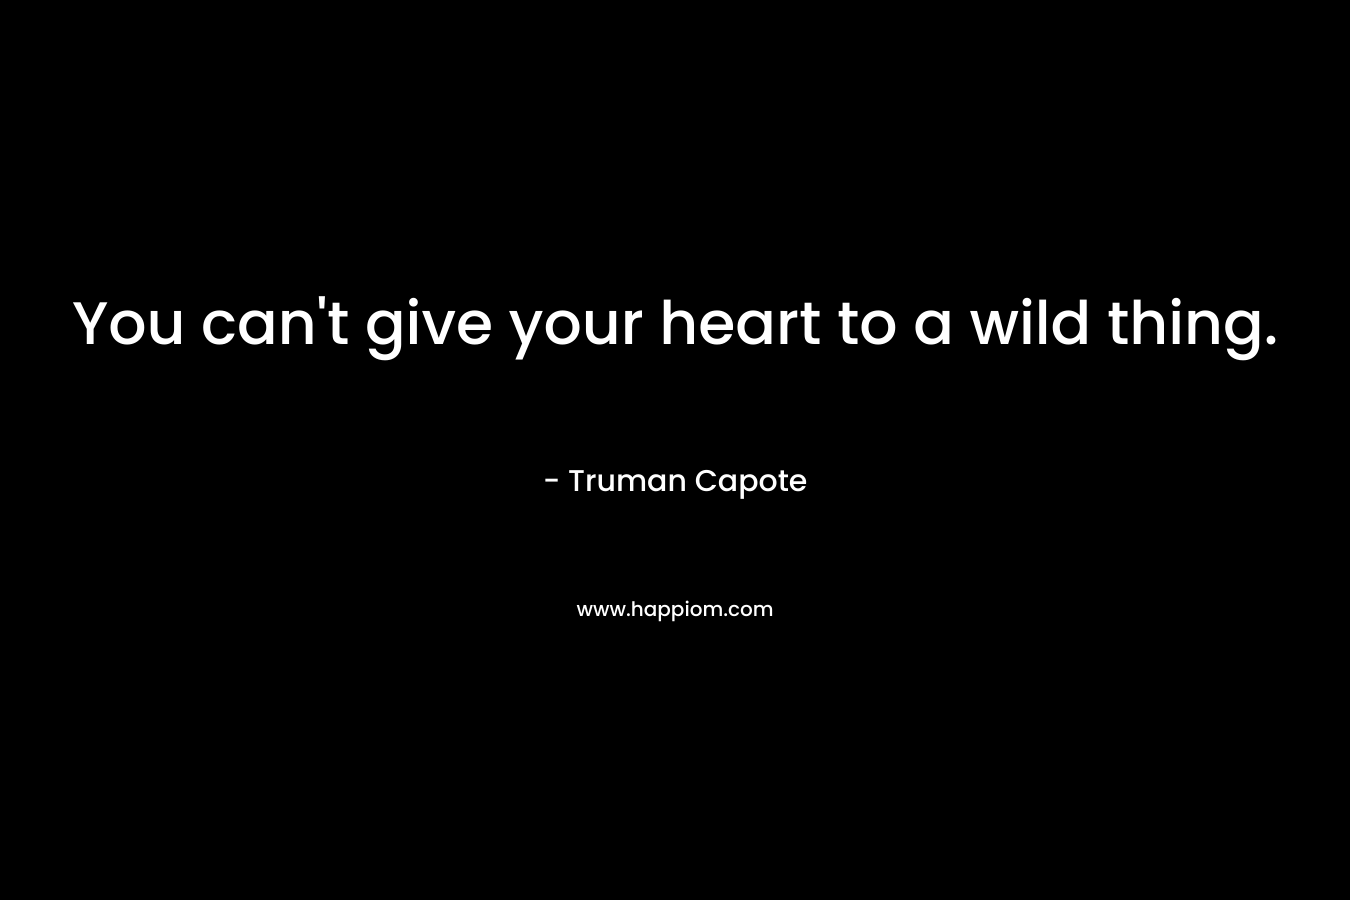 You can't give your heart to a wild thing.